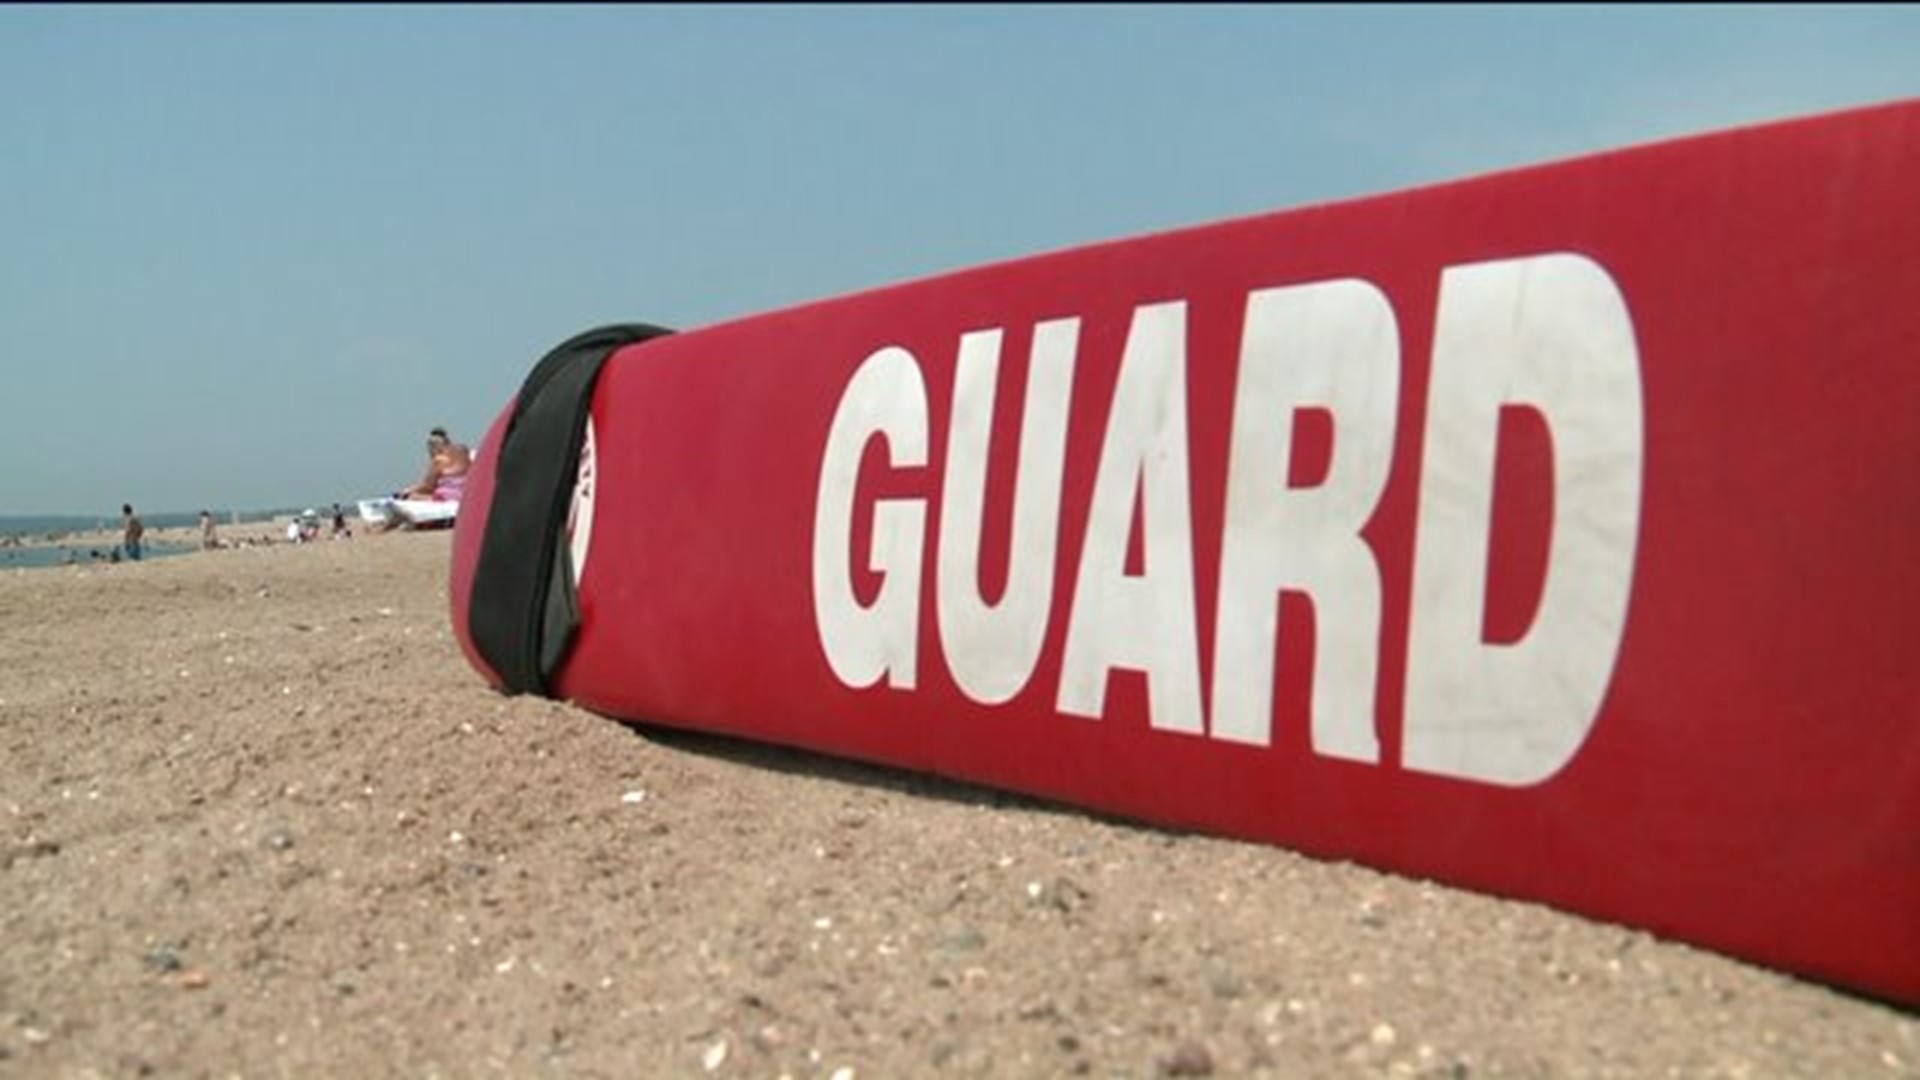 Staffing lifeguard stands at the end of summer is a challenge